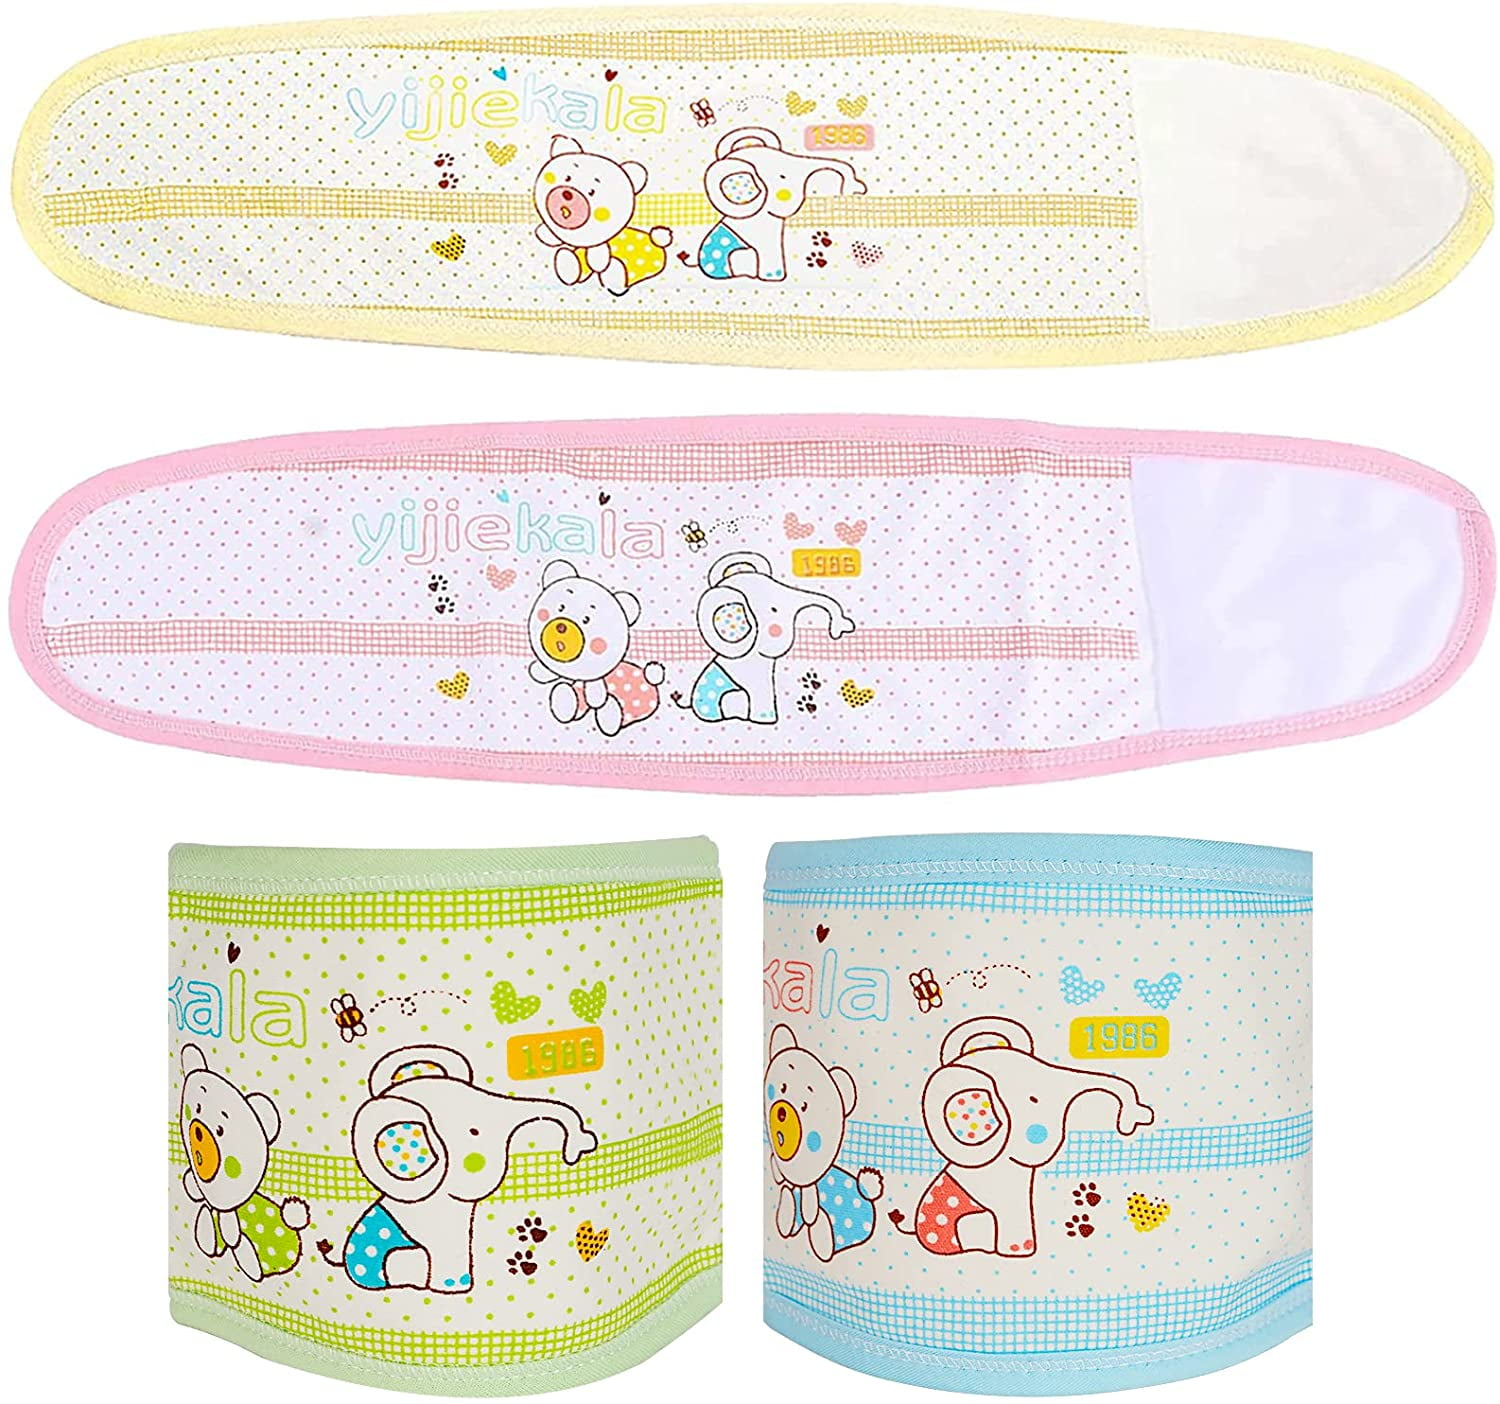 HEALLILY 3PCS Newborn Belly Band Baby Infant Belly Navel Belly Warmer Random Pattern Color